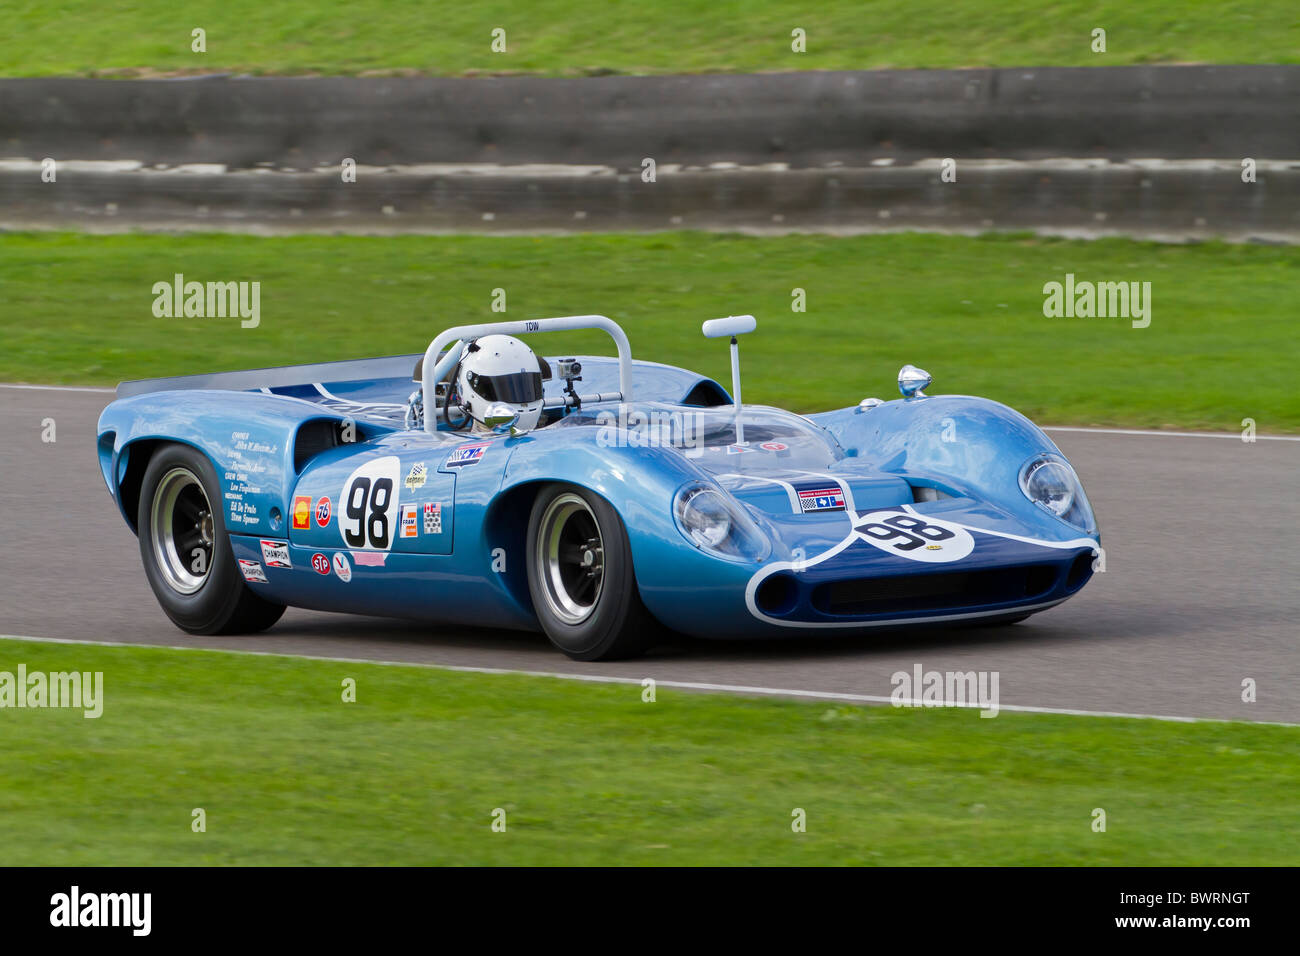 Andrew Smith in the 1965 Lola-Chevrolet T70 Spyder in the Whitsun Trophy race. 2010 Goodwood Revival, Sussex, England, UK. Stock Photo